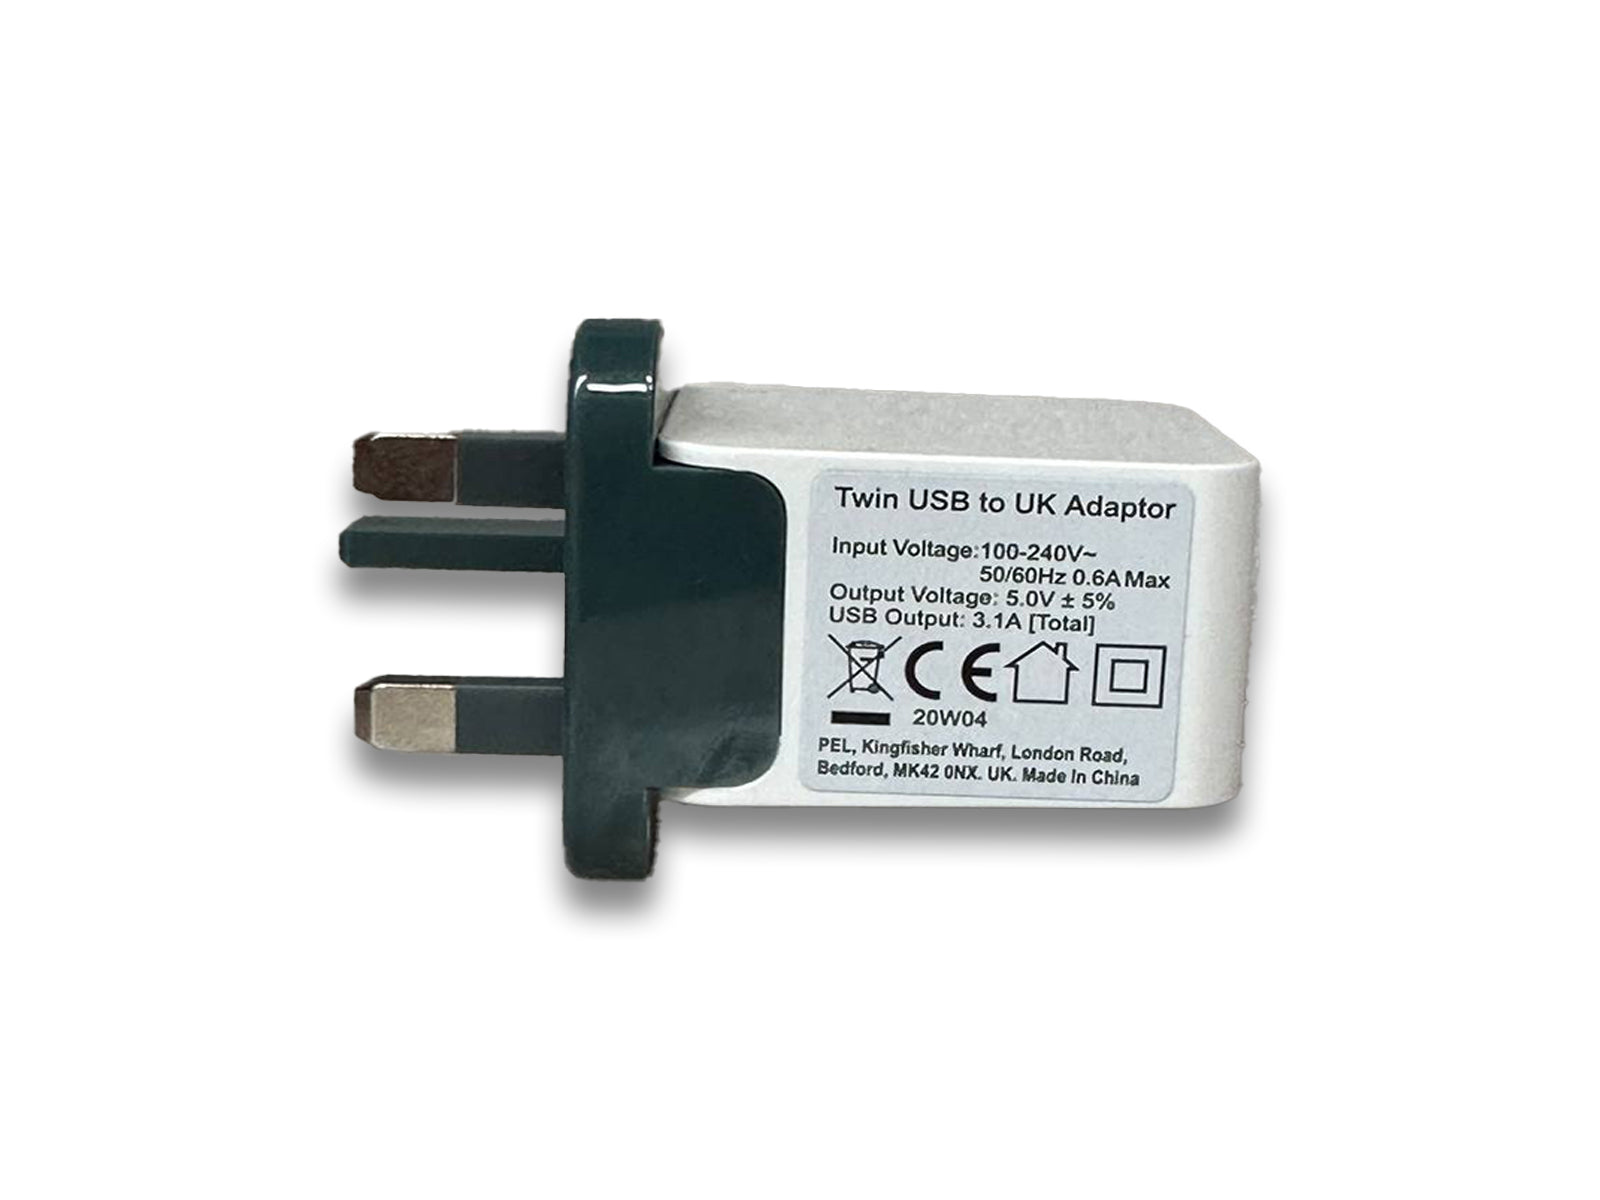 Image shows bottom view of wall charger on white background